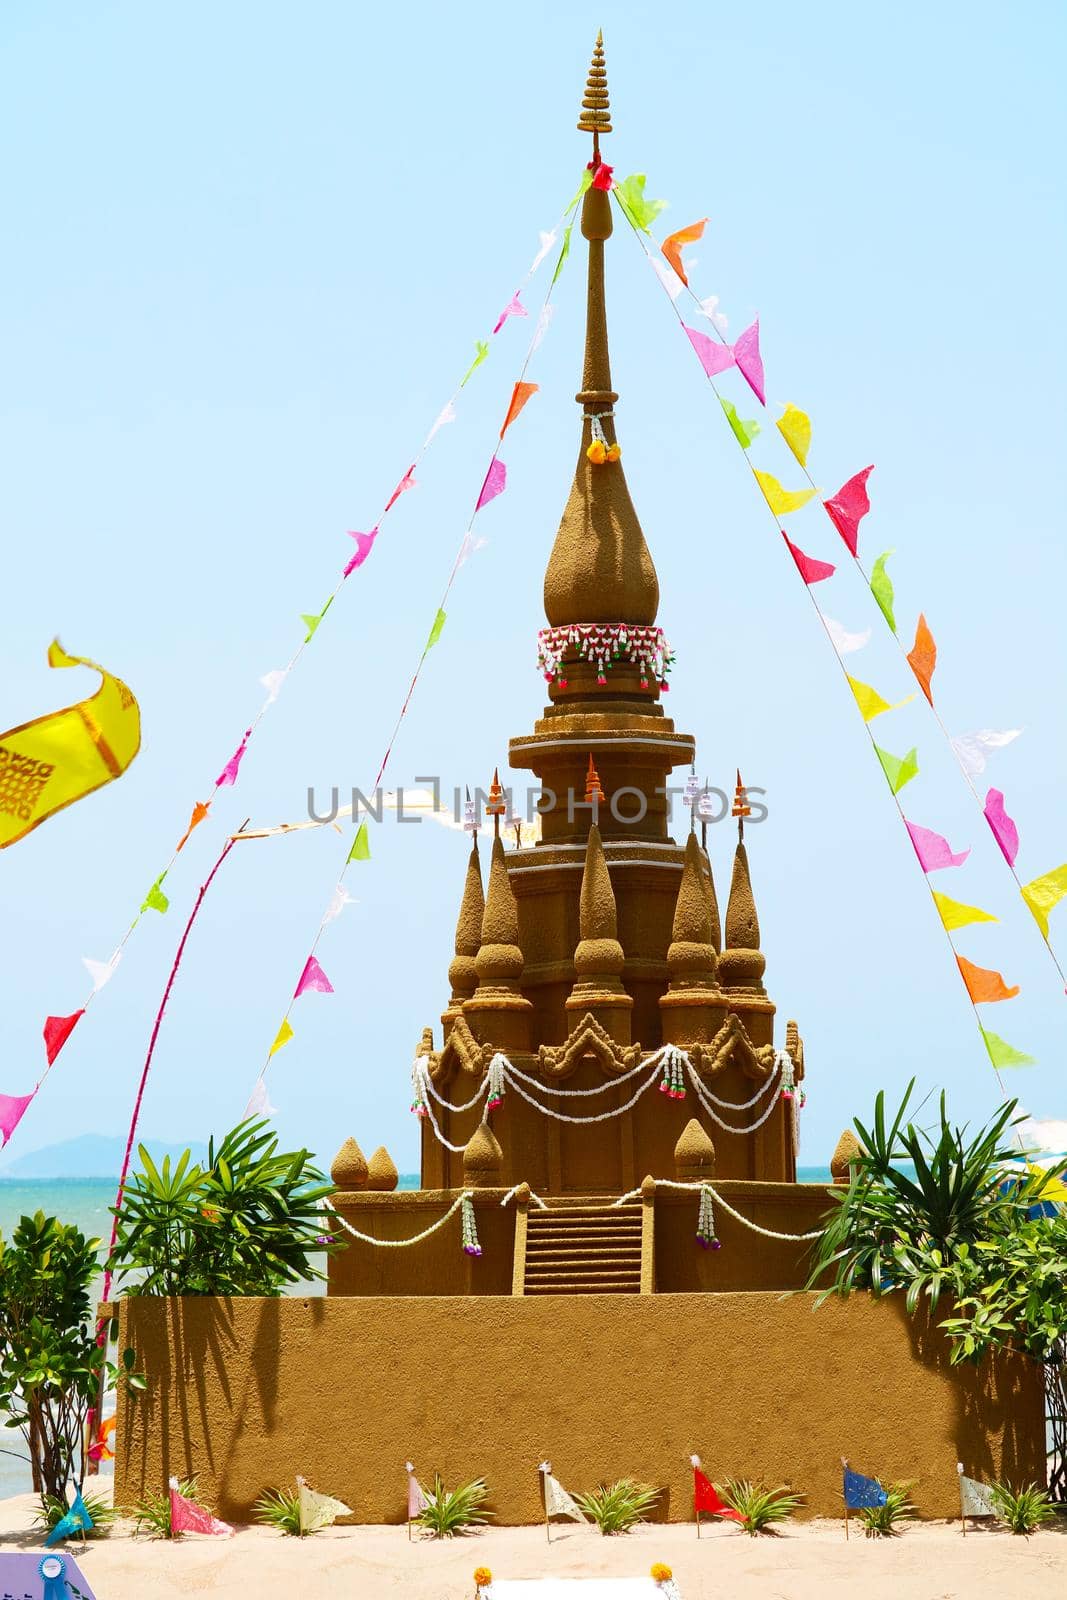 high sand pagoda was carefully built, and beautifully decorated in Songkran festival by Darkfox